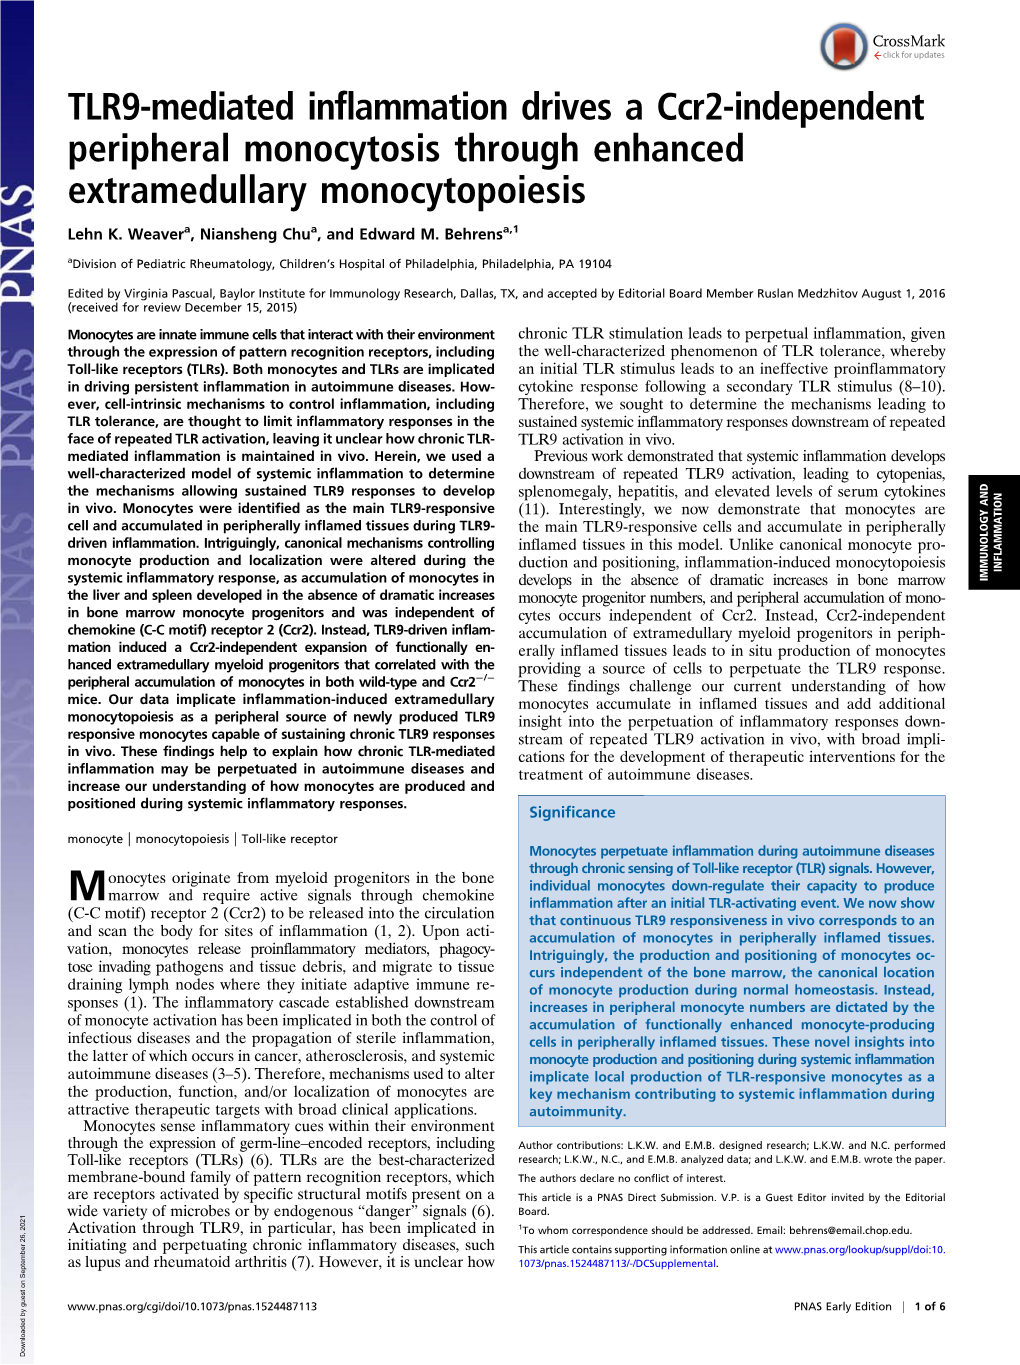 TLR9-Mediated Inflammation Drives a Ccr2-Independent Peripheral Monocytosis Through Enhanced Extramedullary Monocytopoiesis